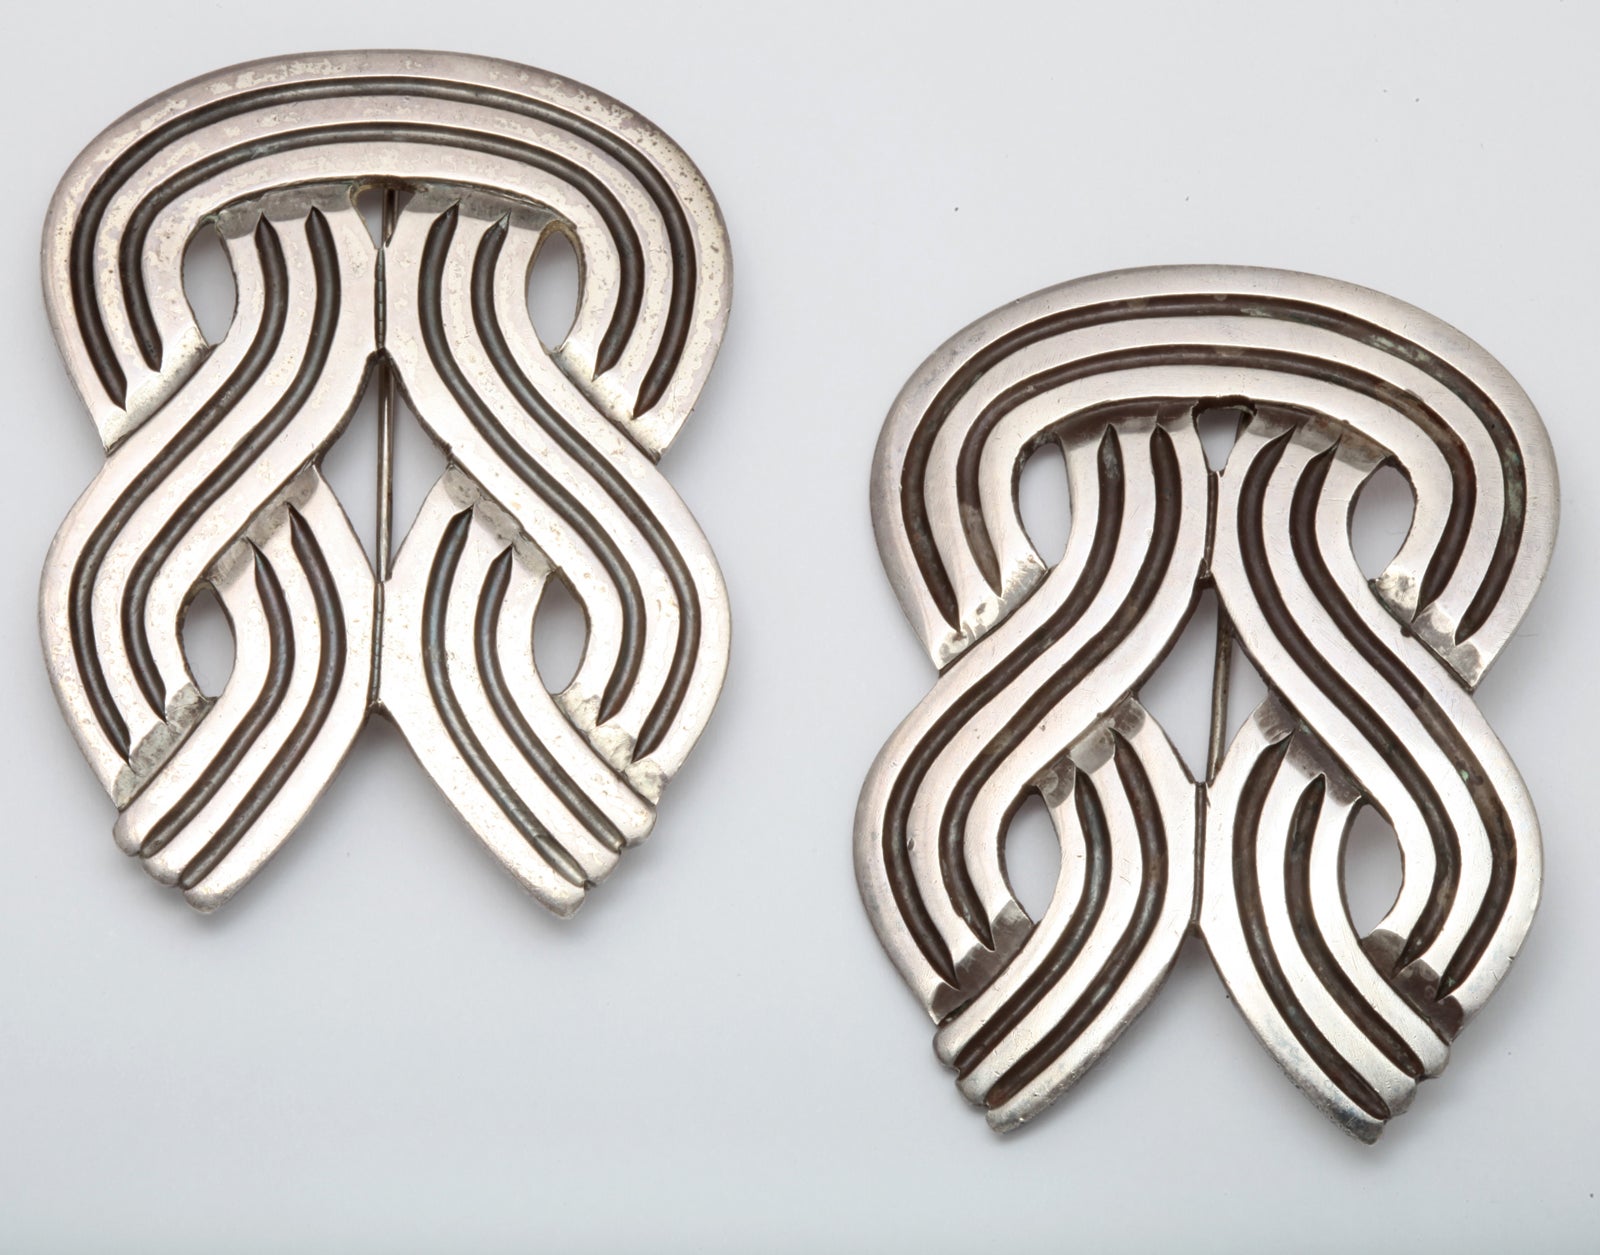 Double eights, four streams, four knots ,however you see the design, you will see the strong statement that these brooches make. They are hand crafted and deeply engraved into swirling lines that have been anodized to emphasize their curves. I tried